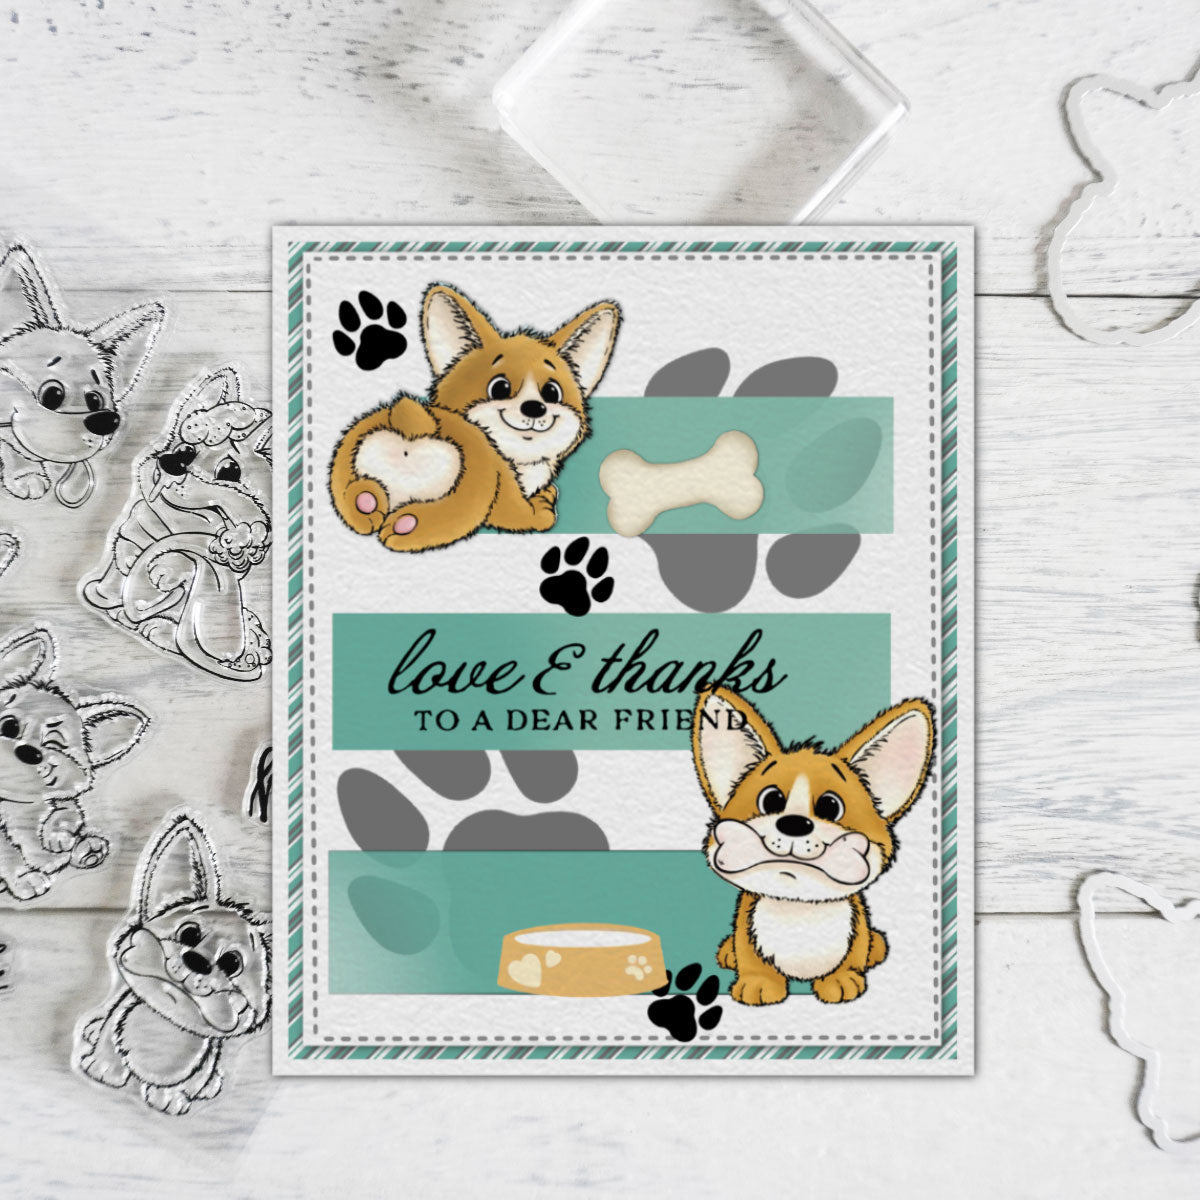 Cute Pet Dogs Joyful Dogs Holiday Life Cutting Dies And Stamp Set YX564-S+D